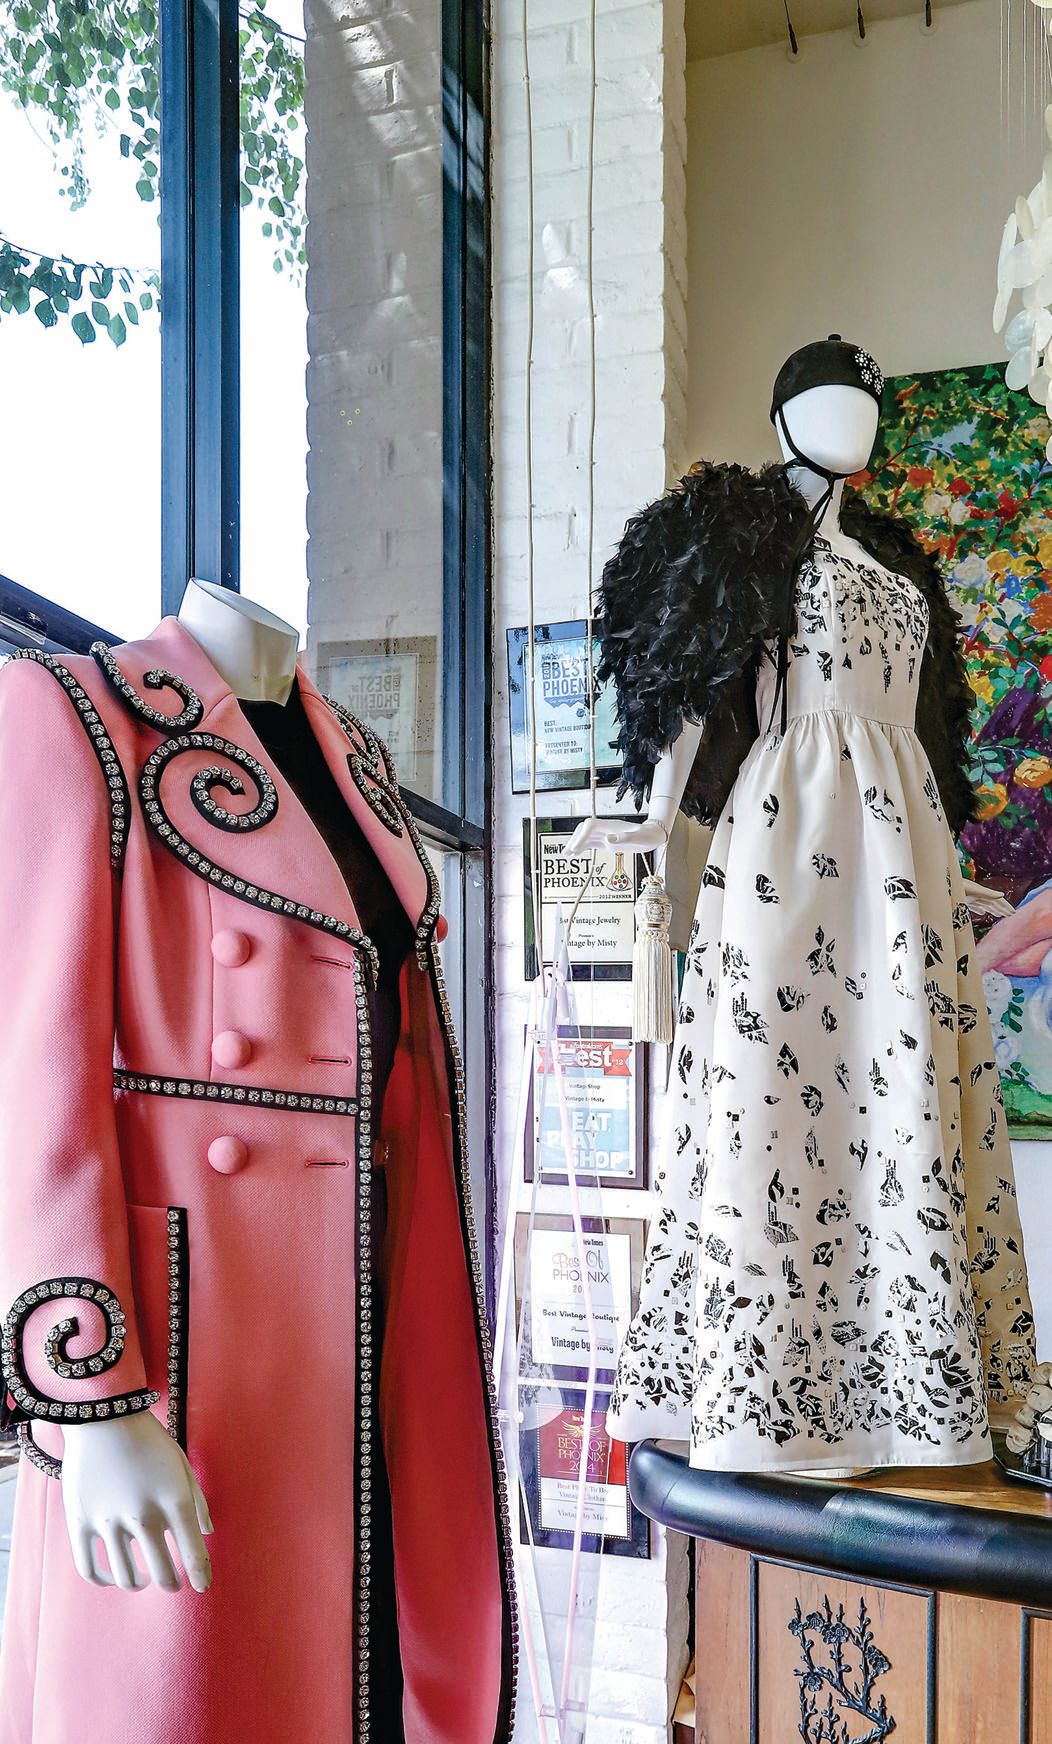 The inventory at luxury resale boutique Vintage by Misty—where celebs like Rihanna, Miley Cyrus and the Kardashians are customers—is always changing. PHOTO COURTESY OF MISTY GUERRIERO